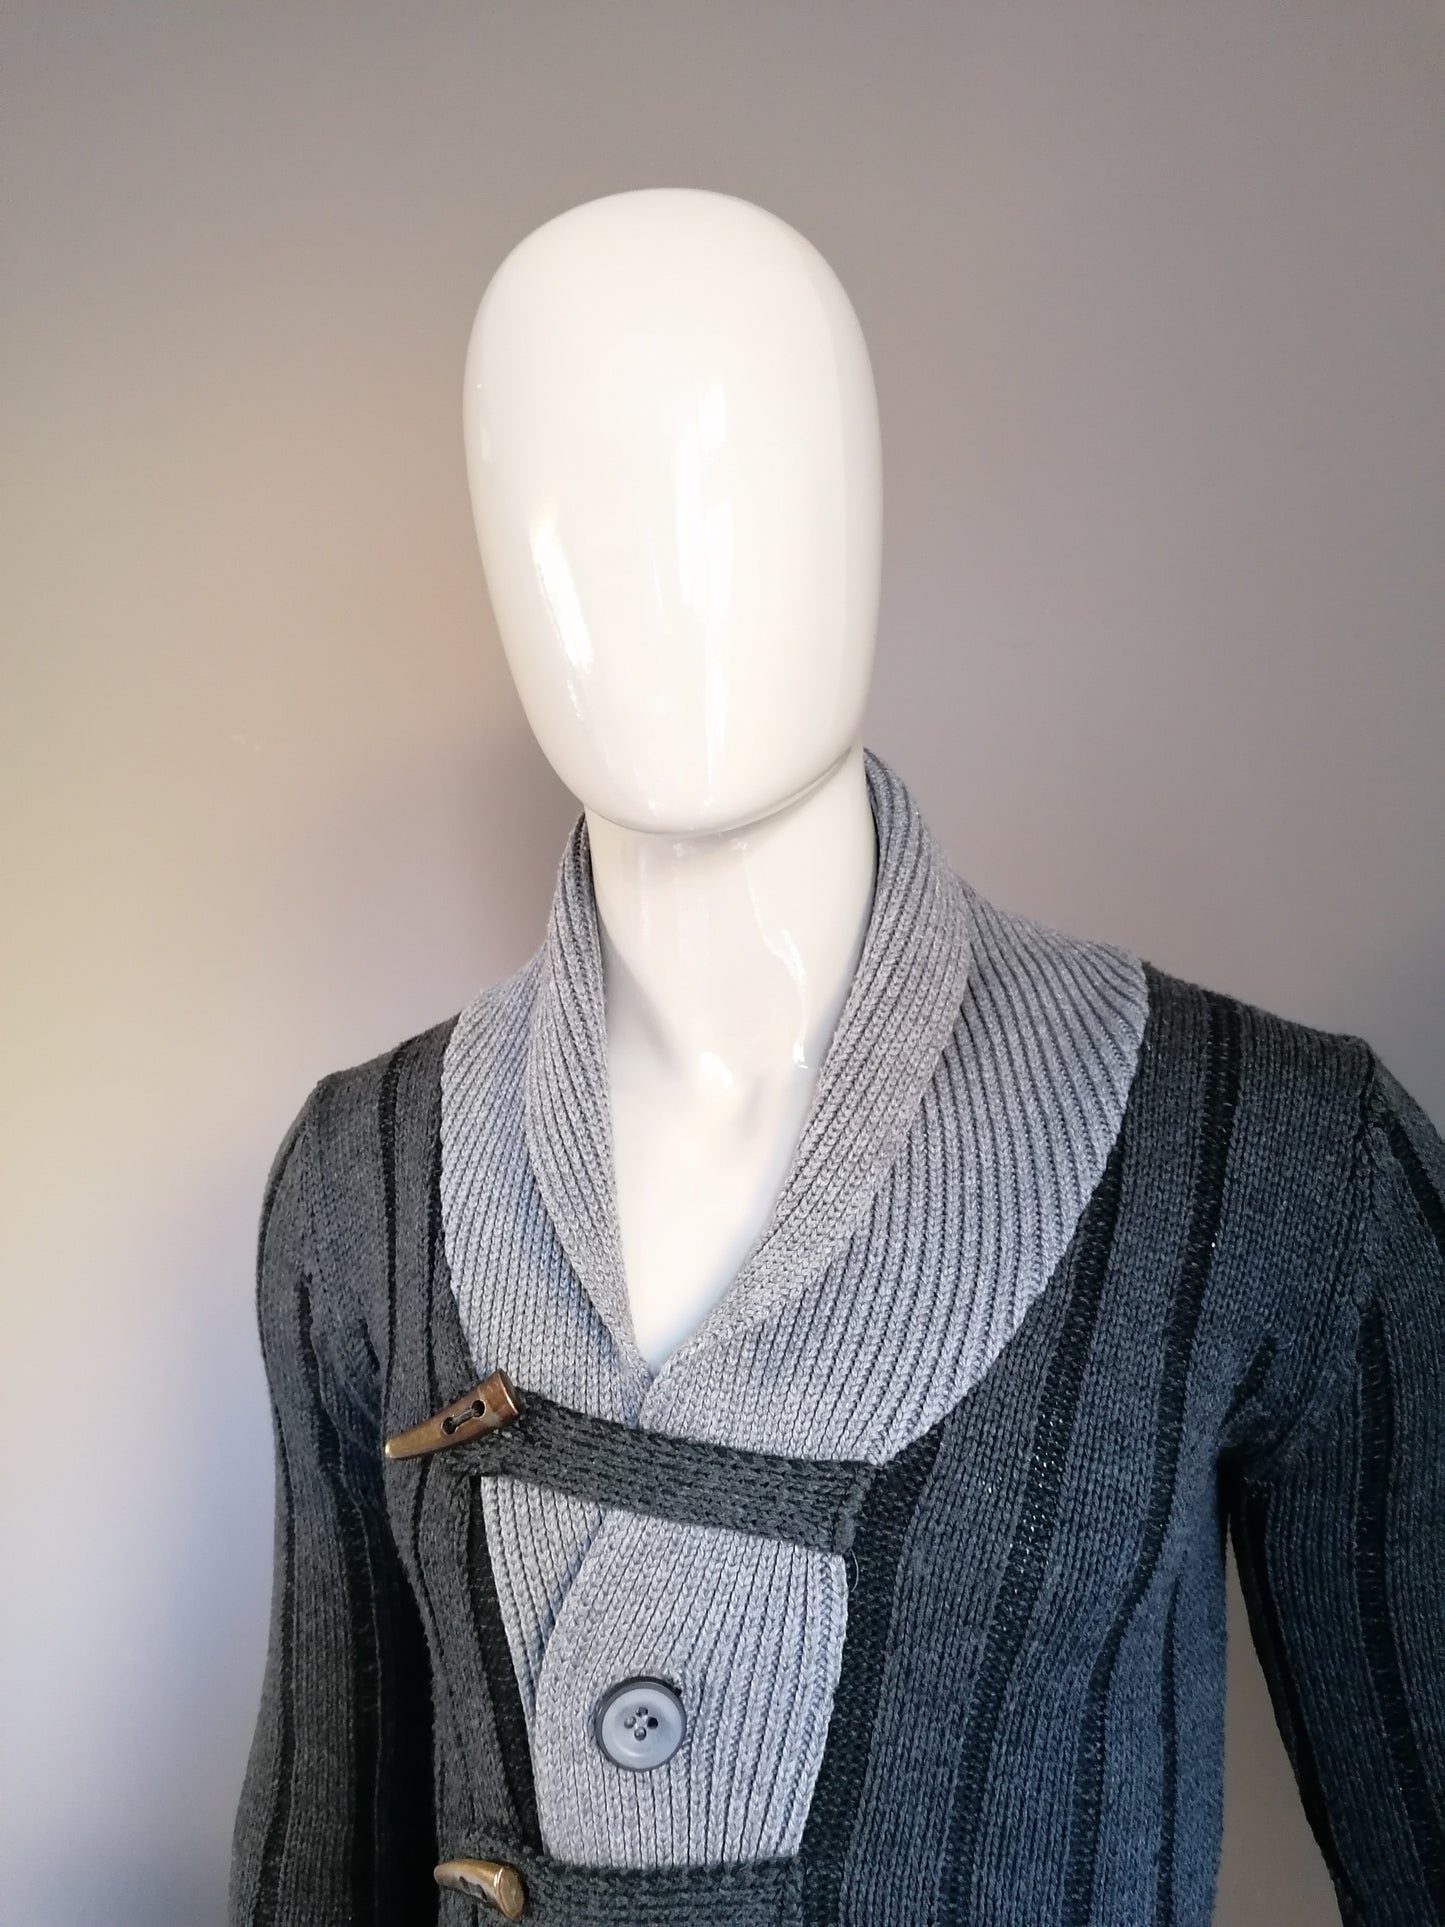 Wam denim vest with buttons. Gray colored. Size S.